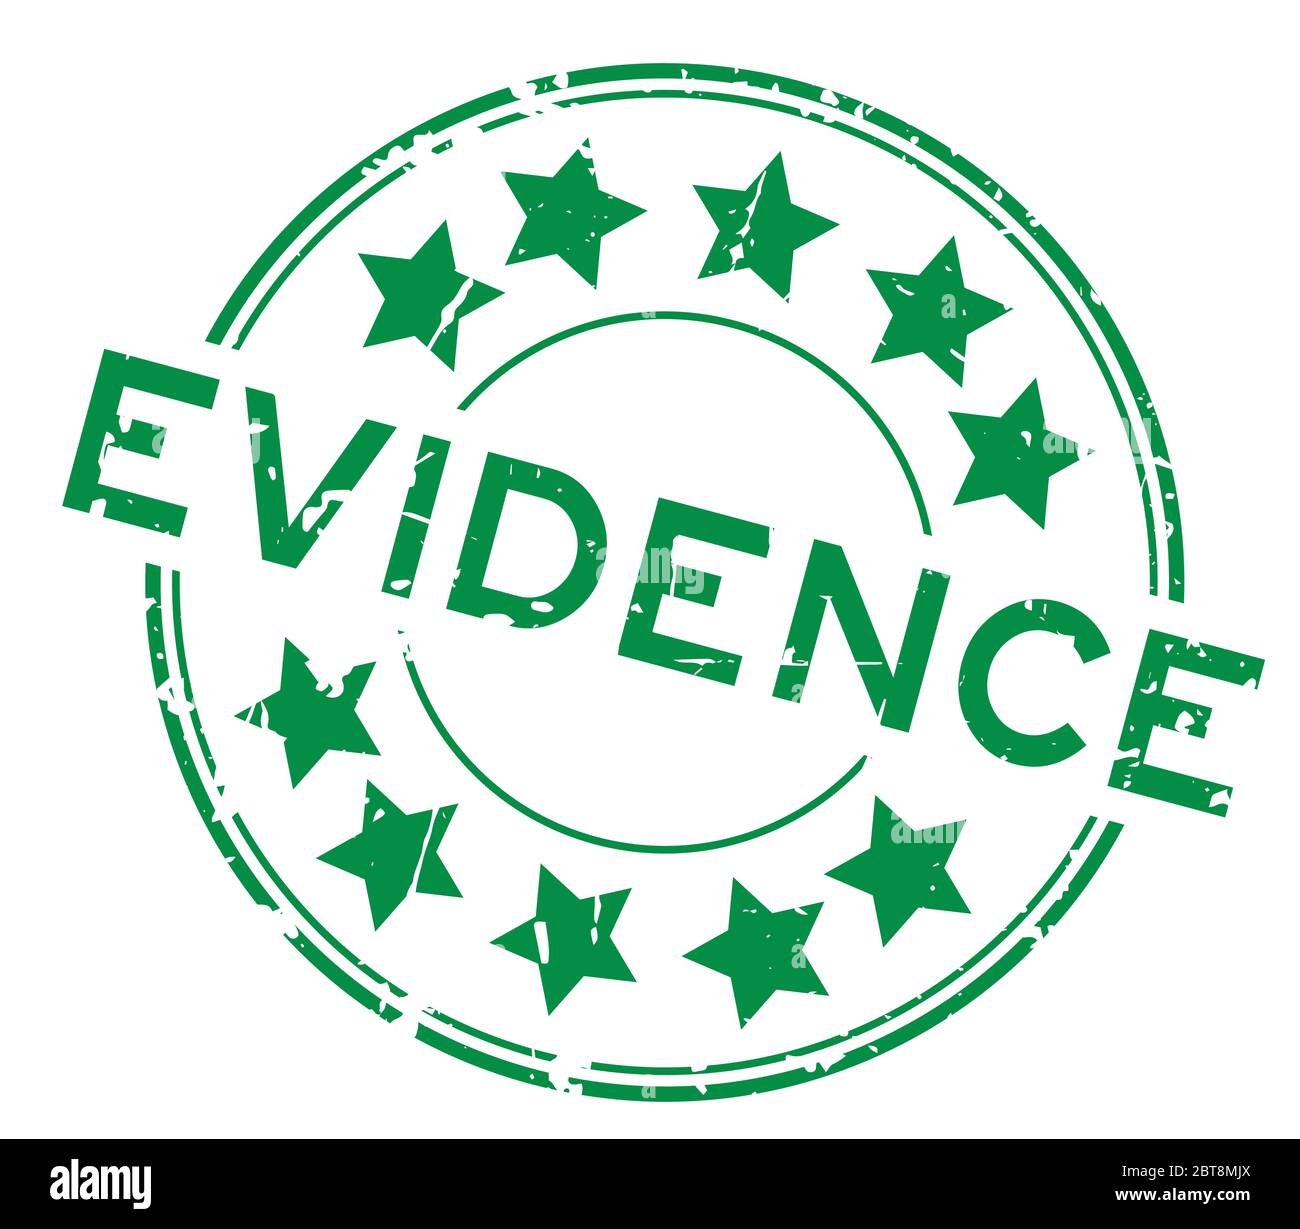 Grunge green evidence word with star icon round rubber seal stamp on white background Stock Vector